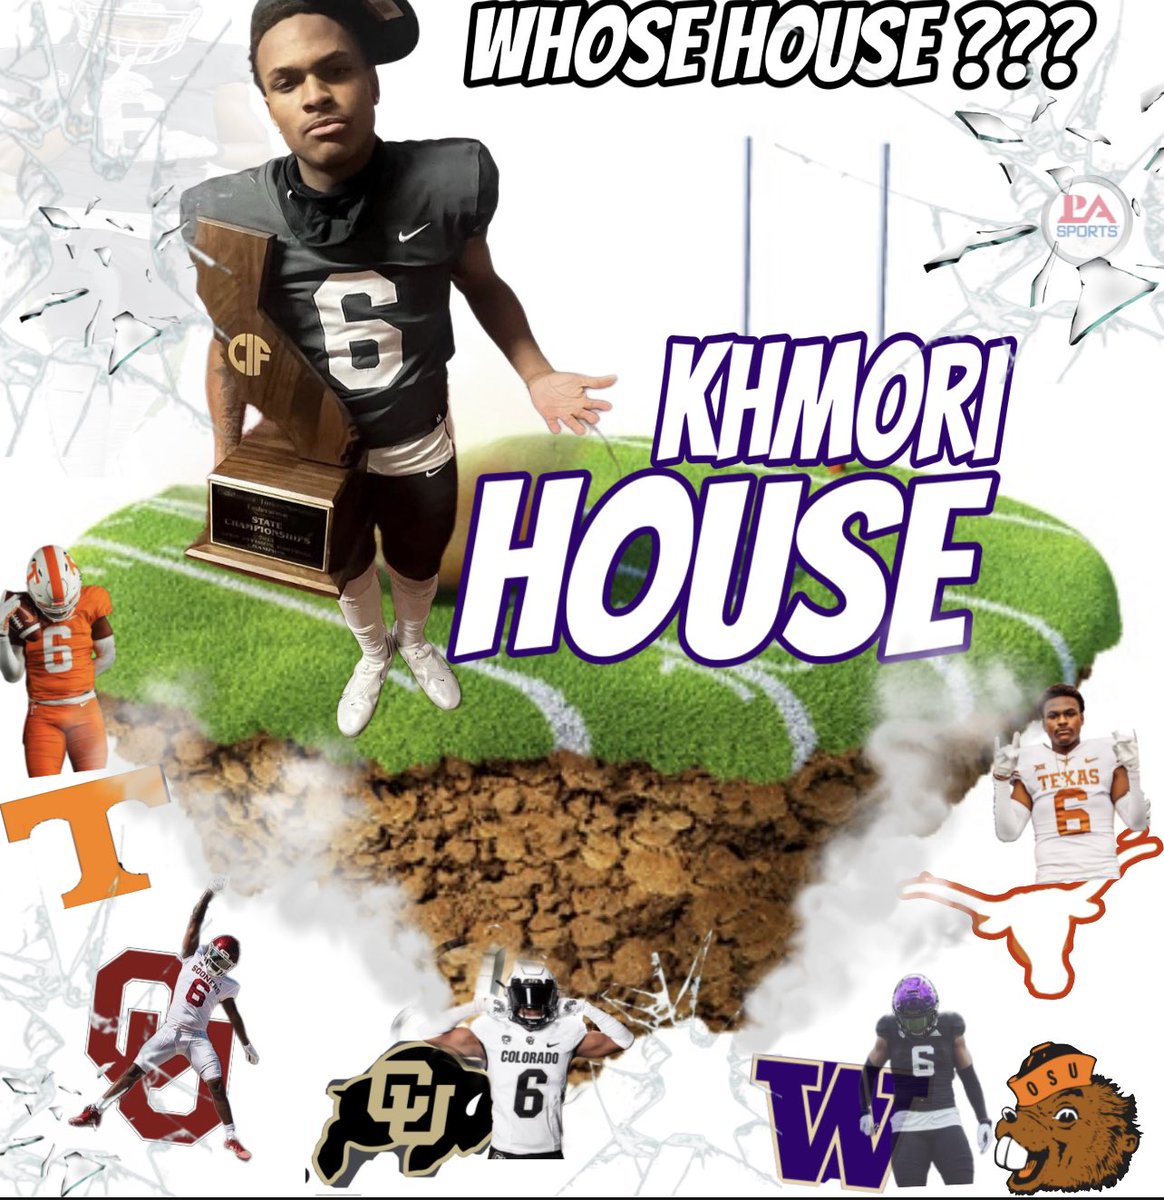 Where will @khmori_house go ? Announcement 📣 coming at end of the month stay tuned @proaktivesports #WhoseHouse?